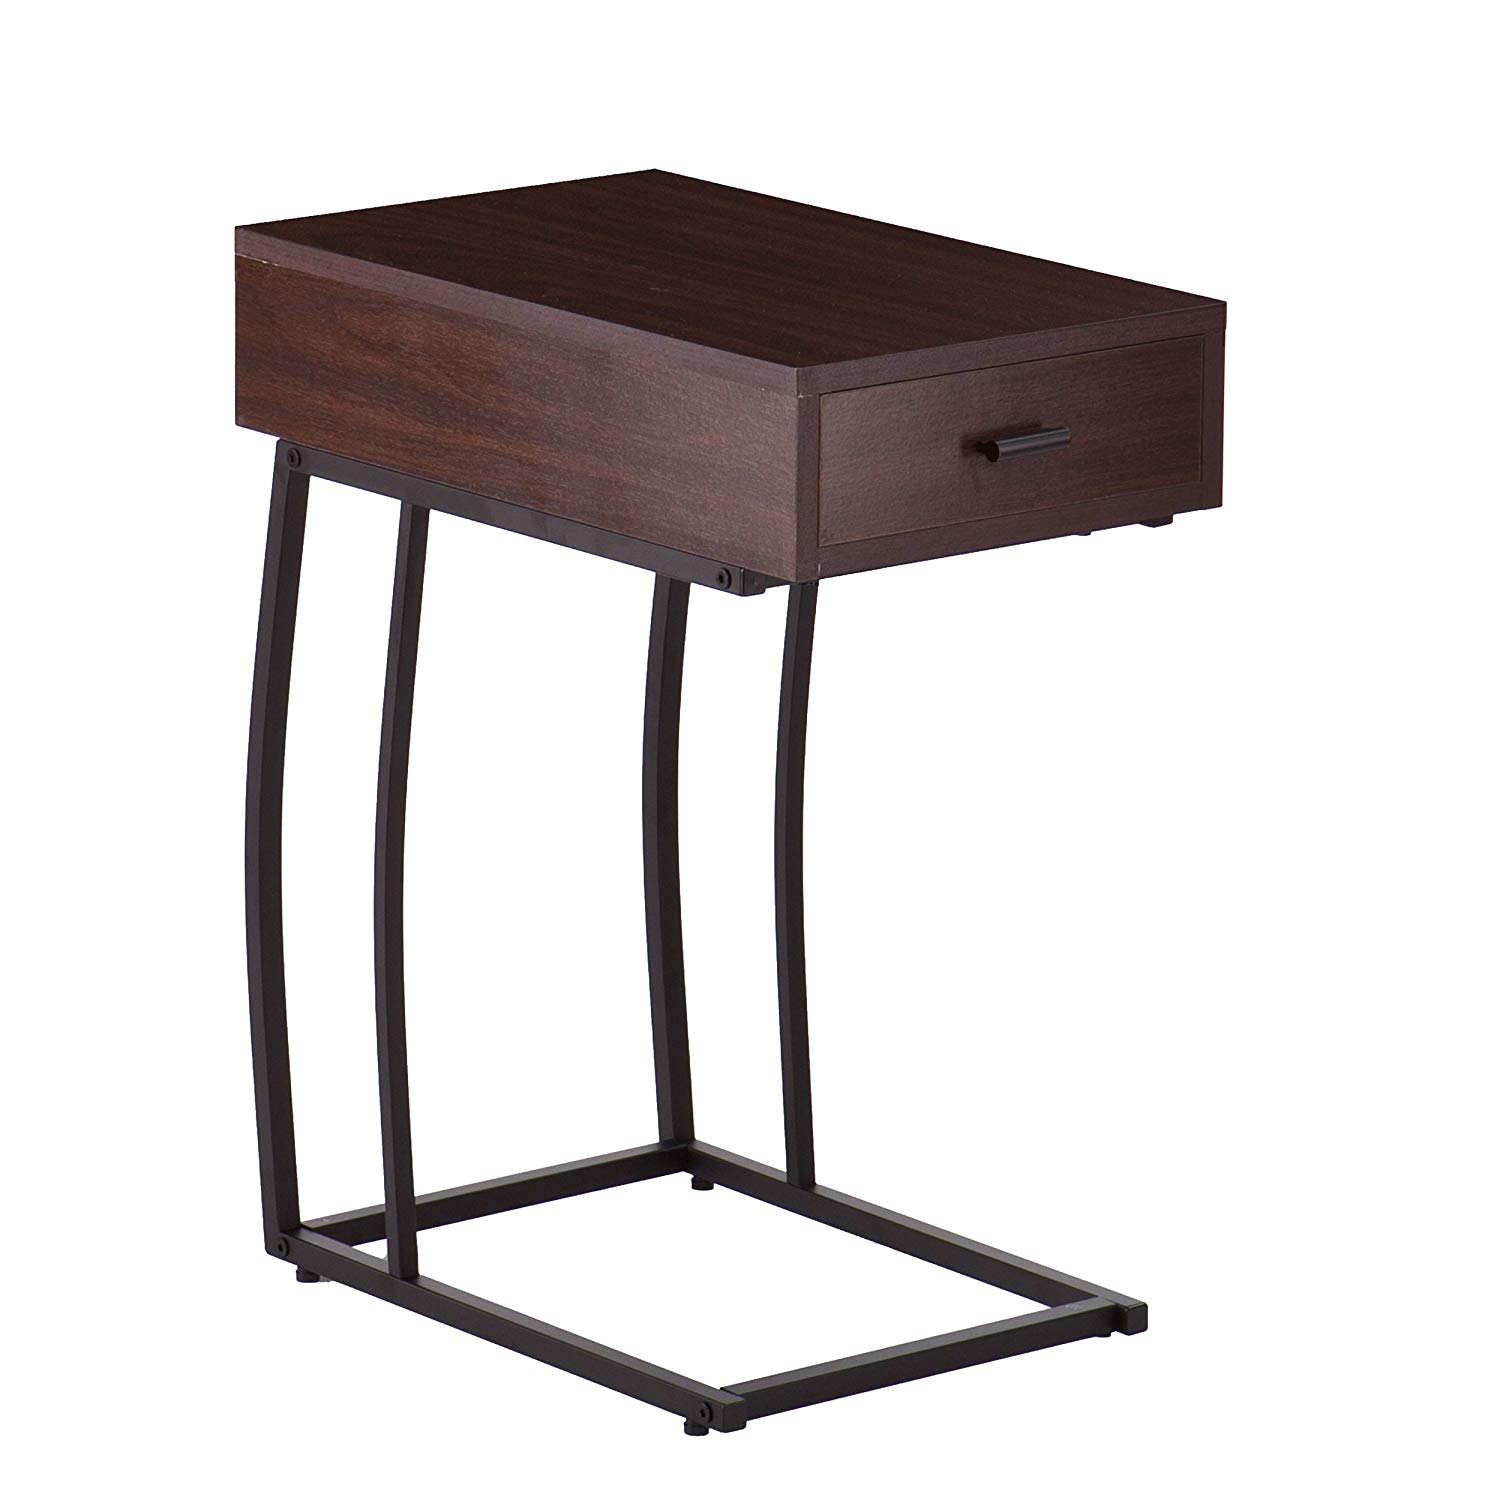 porten side table power usb kitchen dining accent with wood frame mirror room and board rugs black console drawers gold white marble coffee narrow corner plastic garden furniture